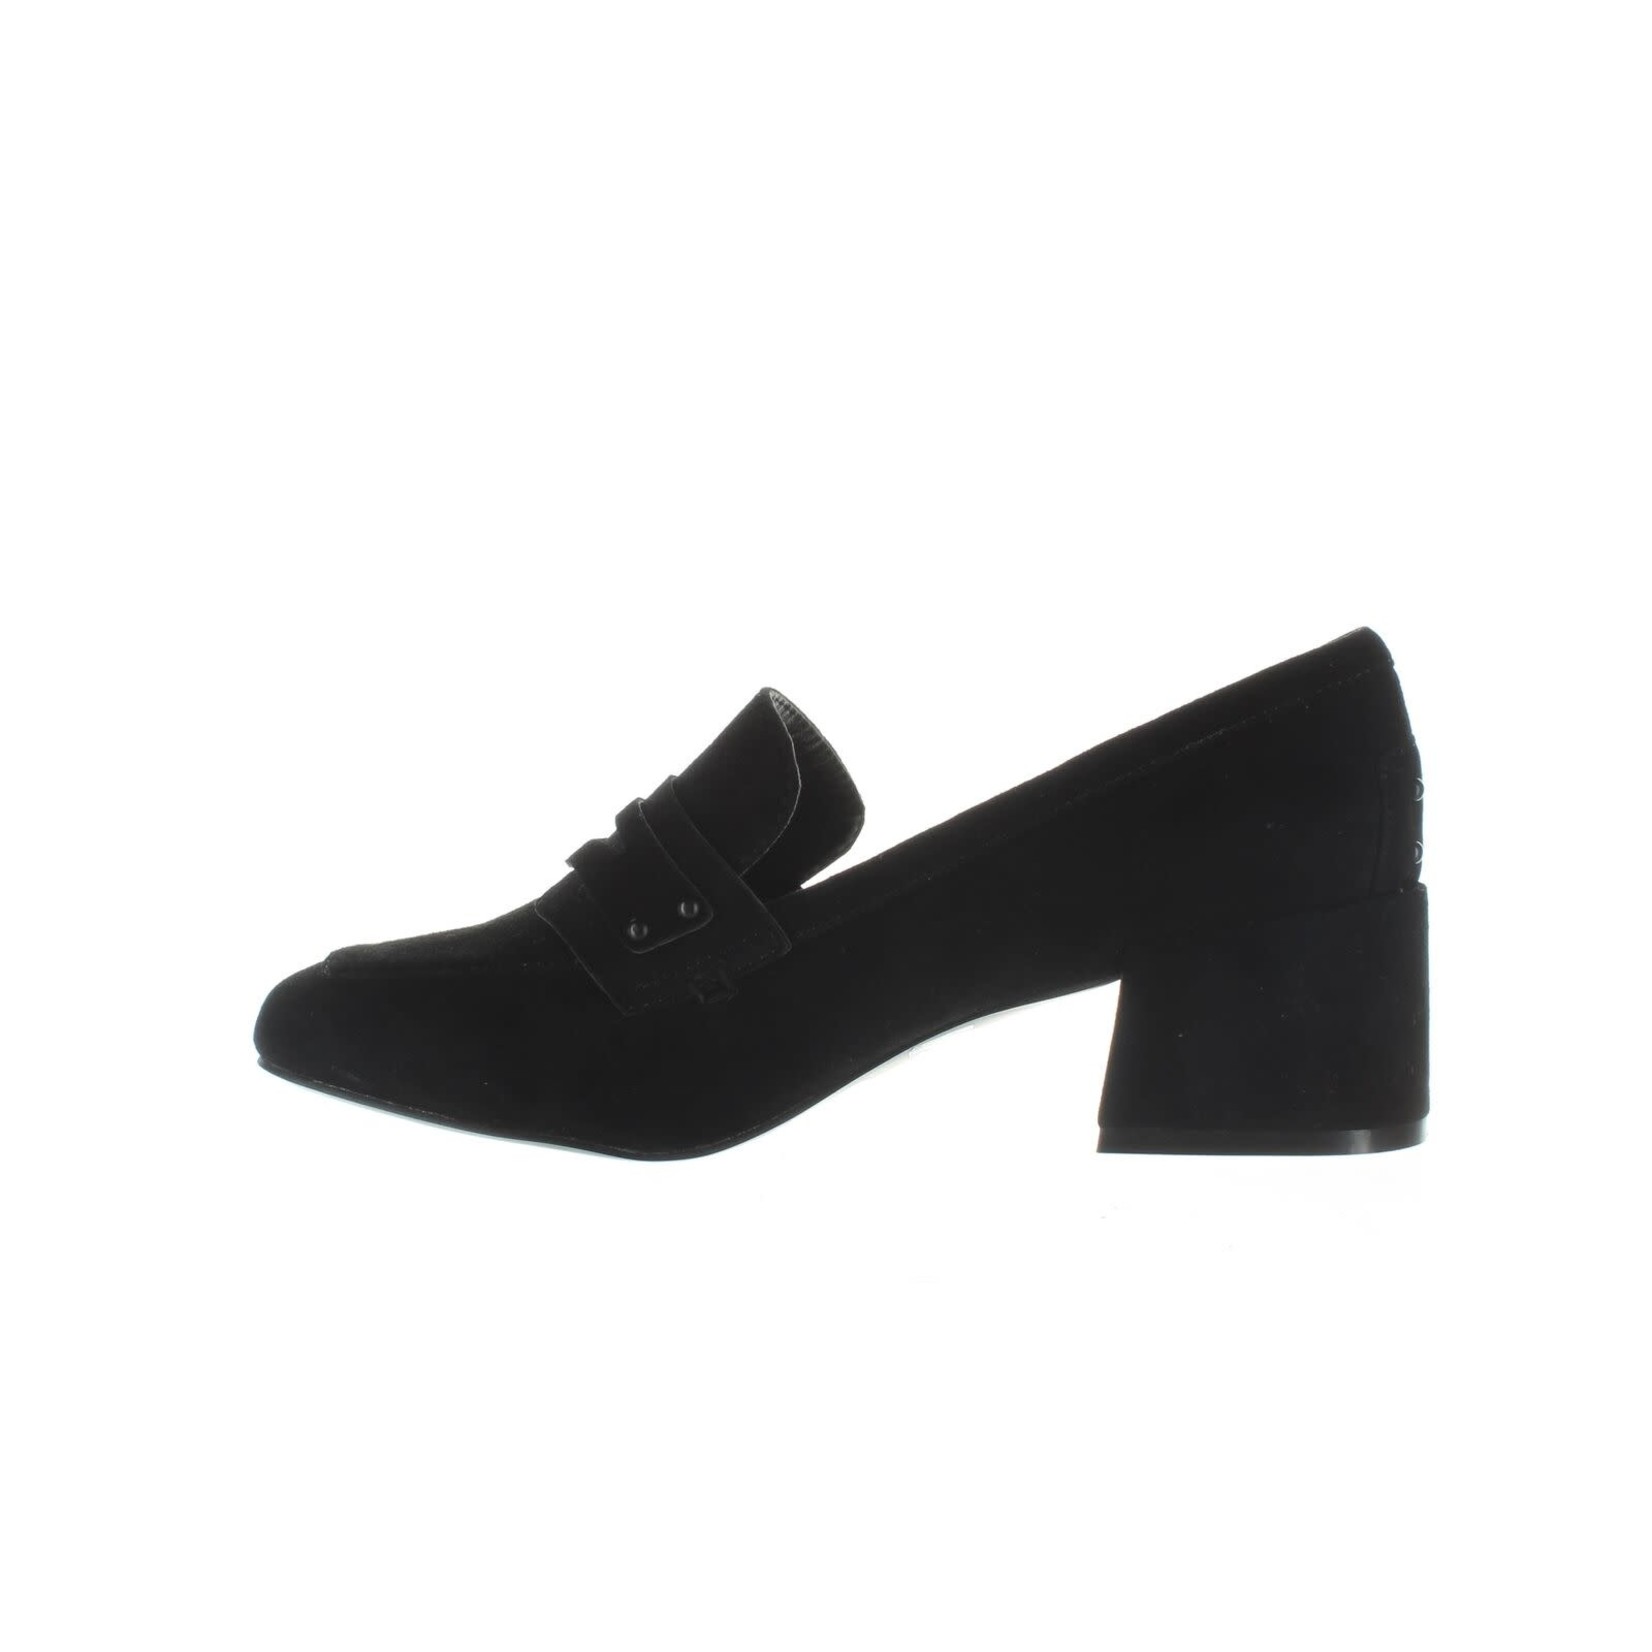 Chinese Laundry Marilyn Black Suede by Chinese Laundry